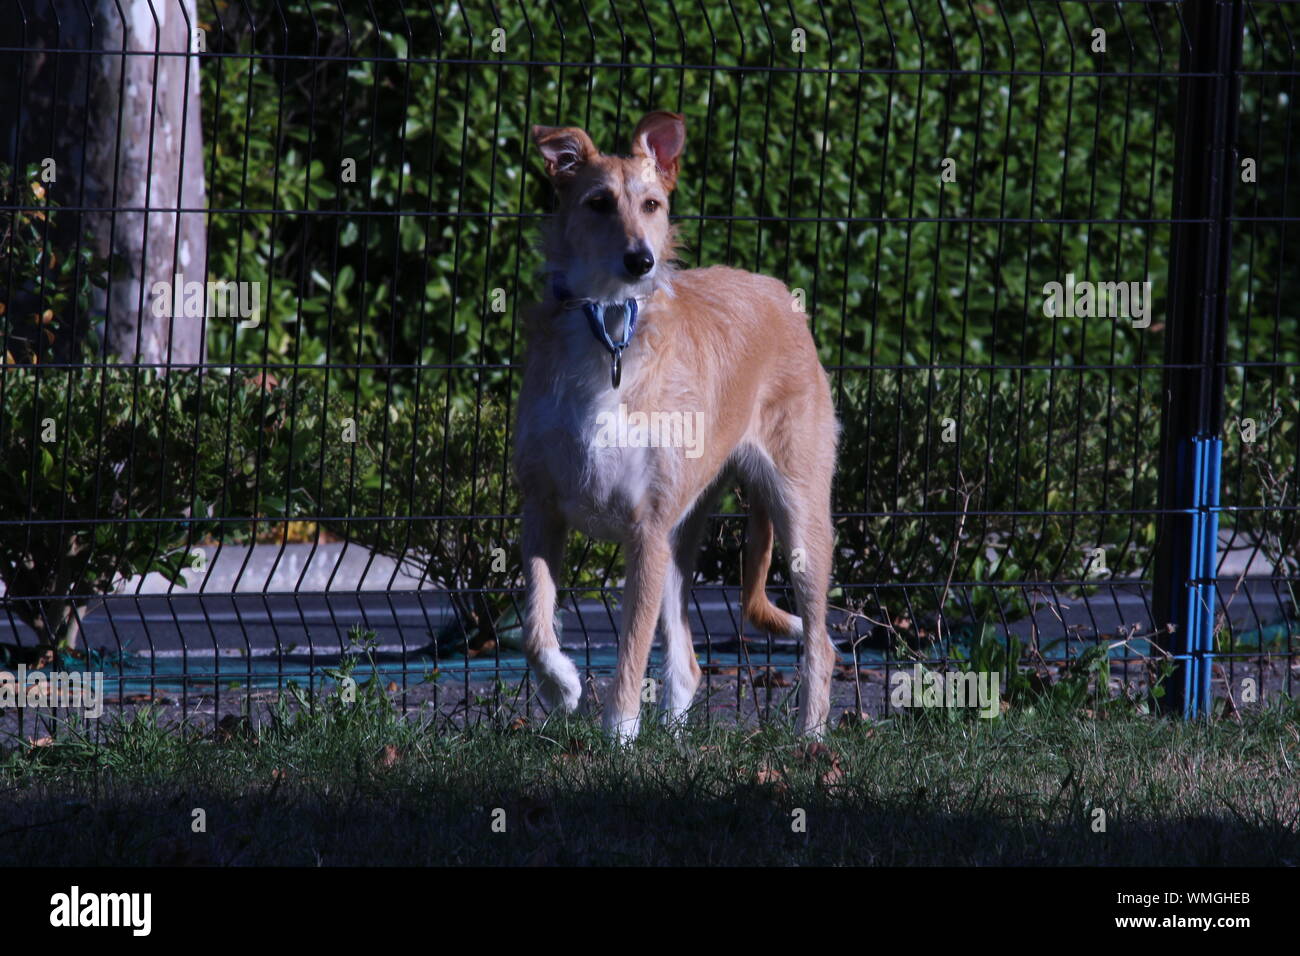 Sighthound On Field By Fence Stock Photo